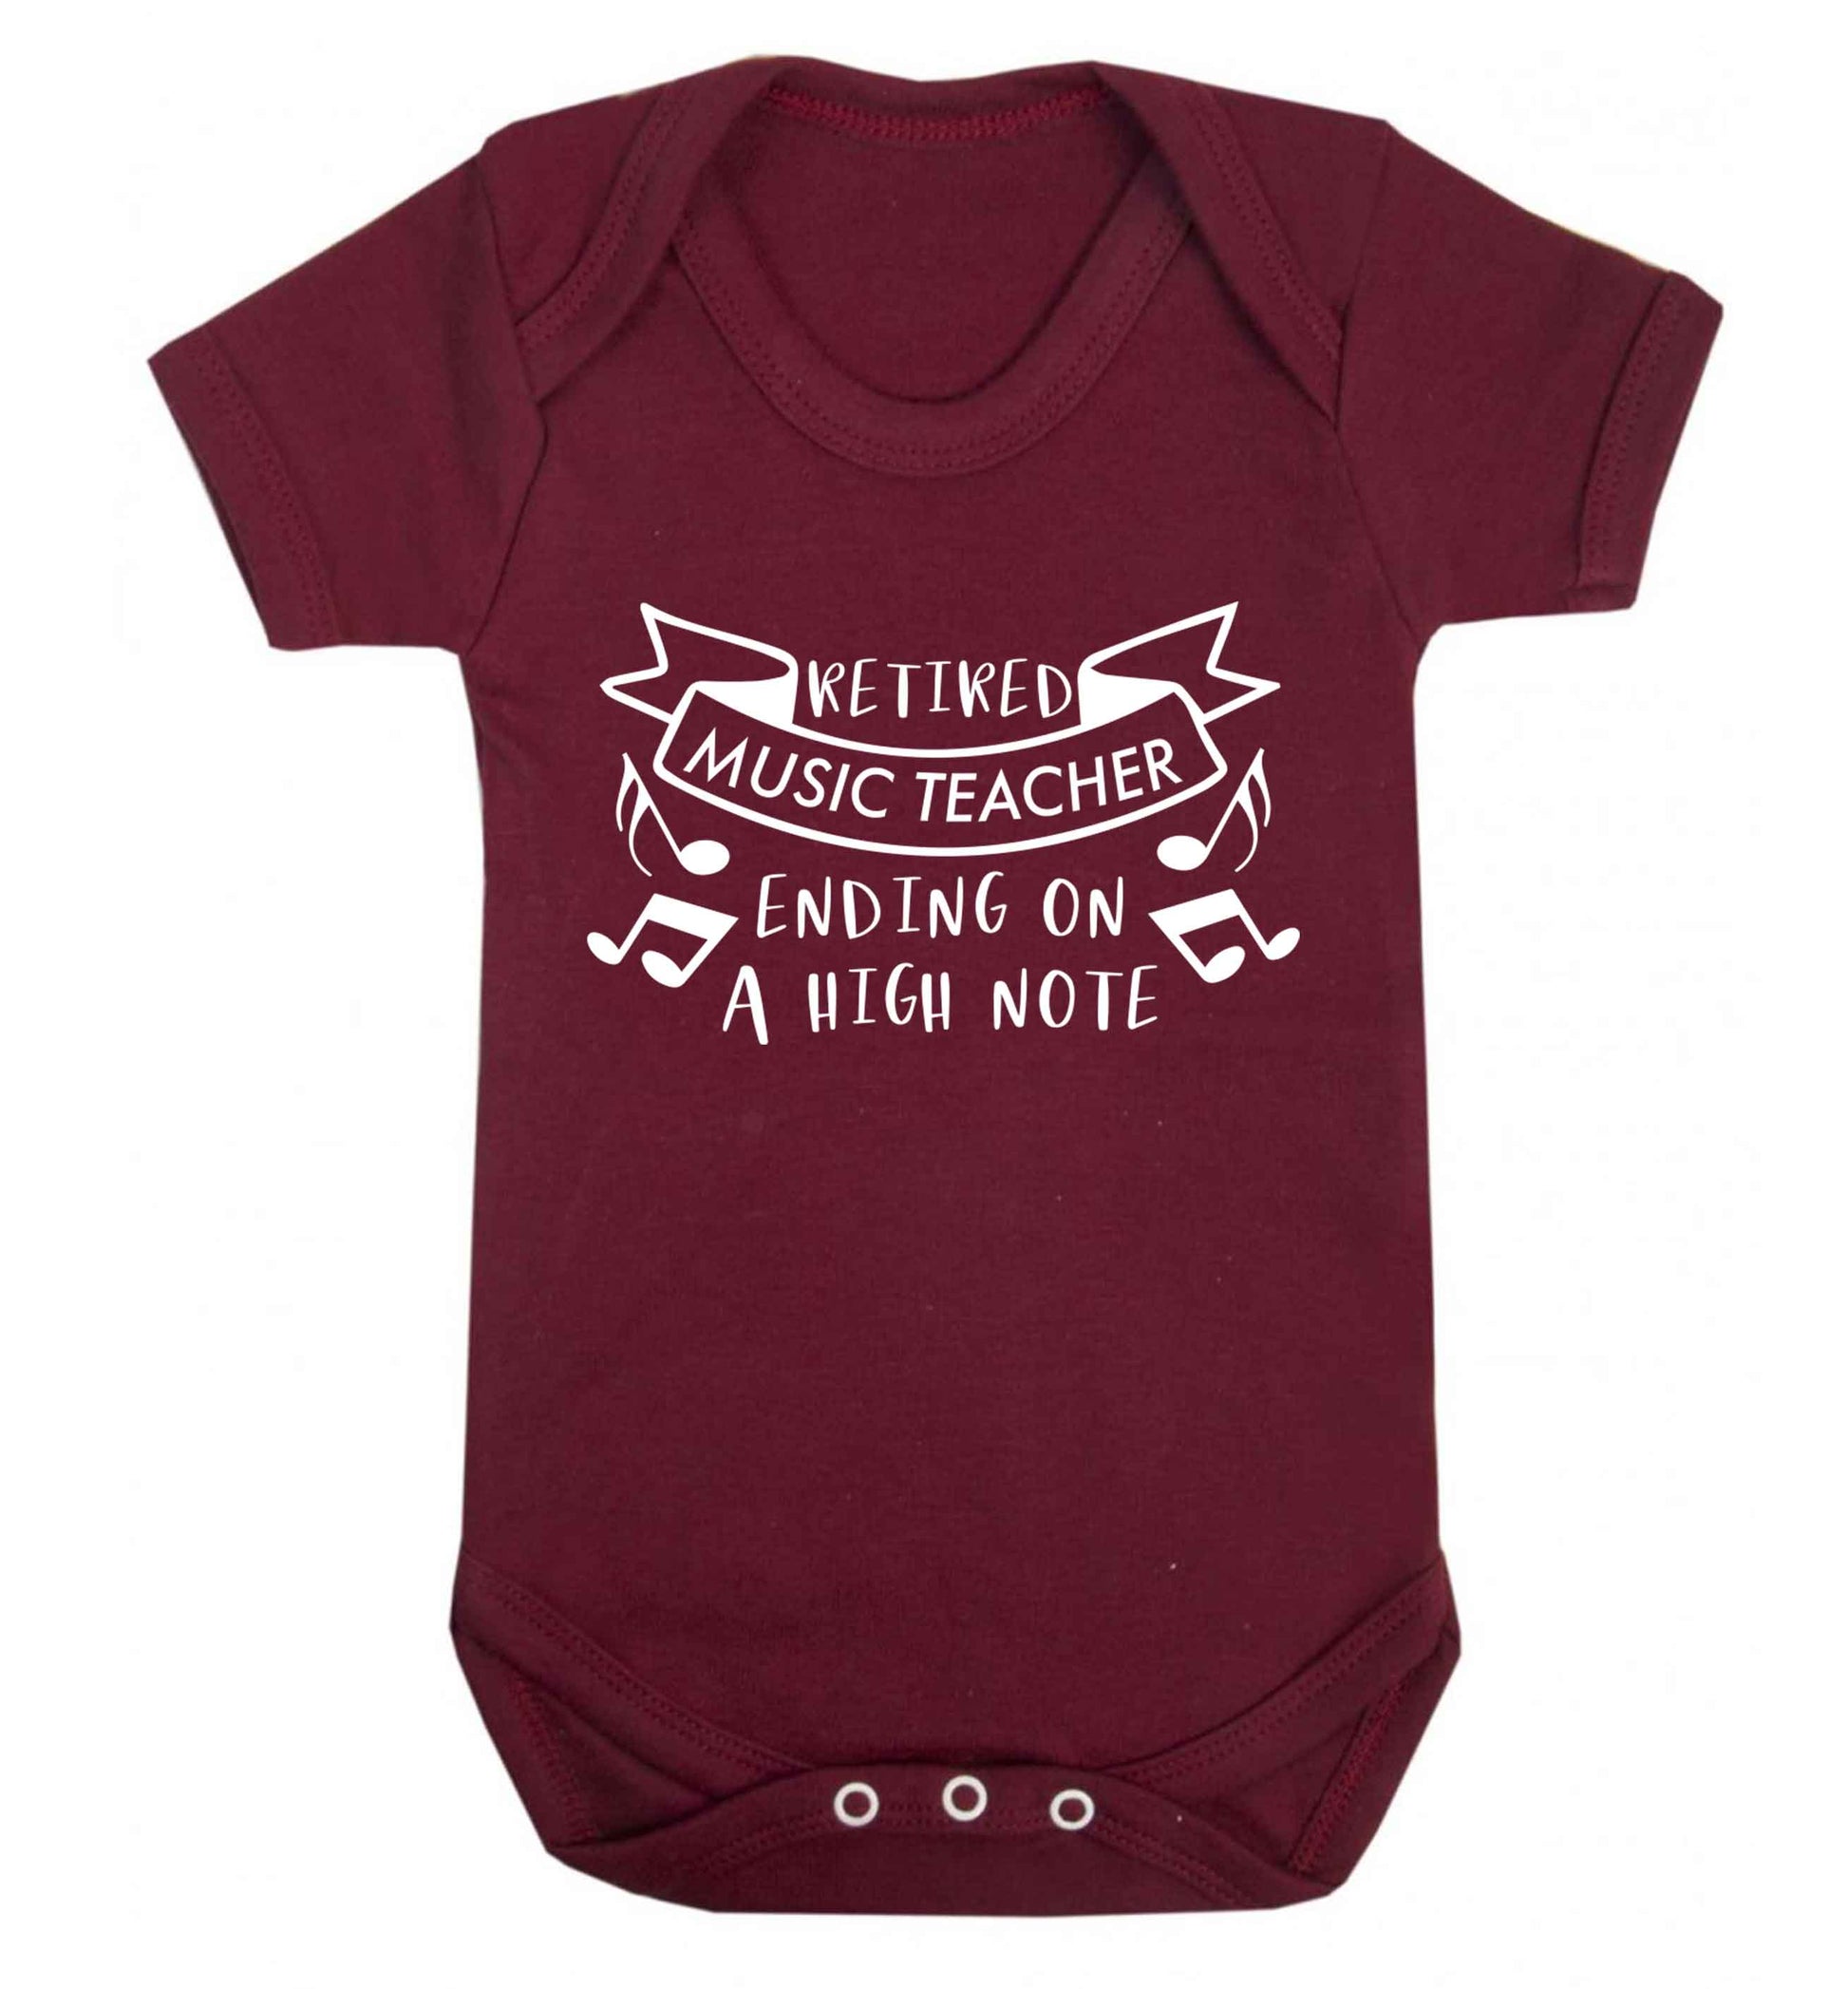 Retired music teacher ending on a high note Baby Vest maroon 18-24 months